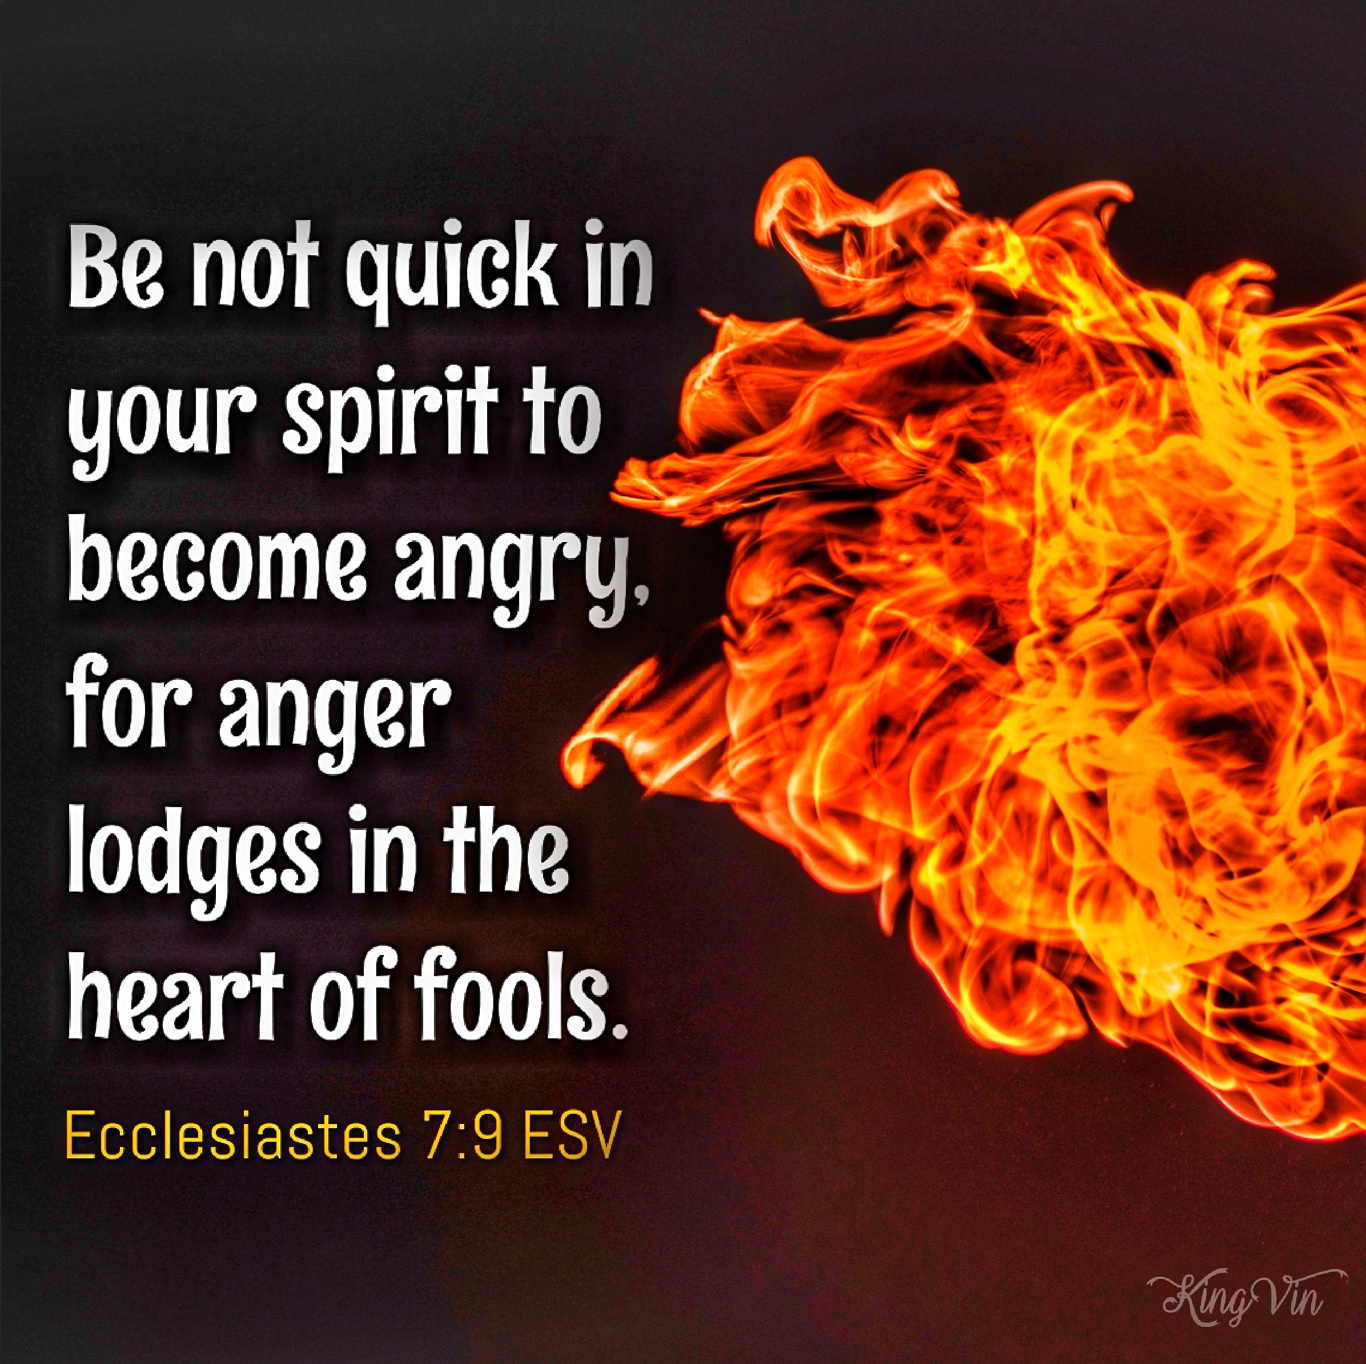 Be not quick in your spirit to become angry, for anger lodges in the heart of fools. Ecclesiastes 7:9